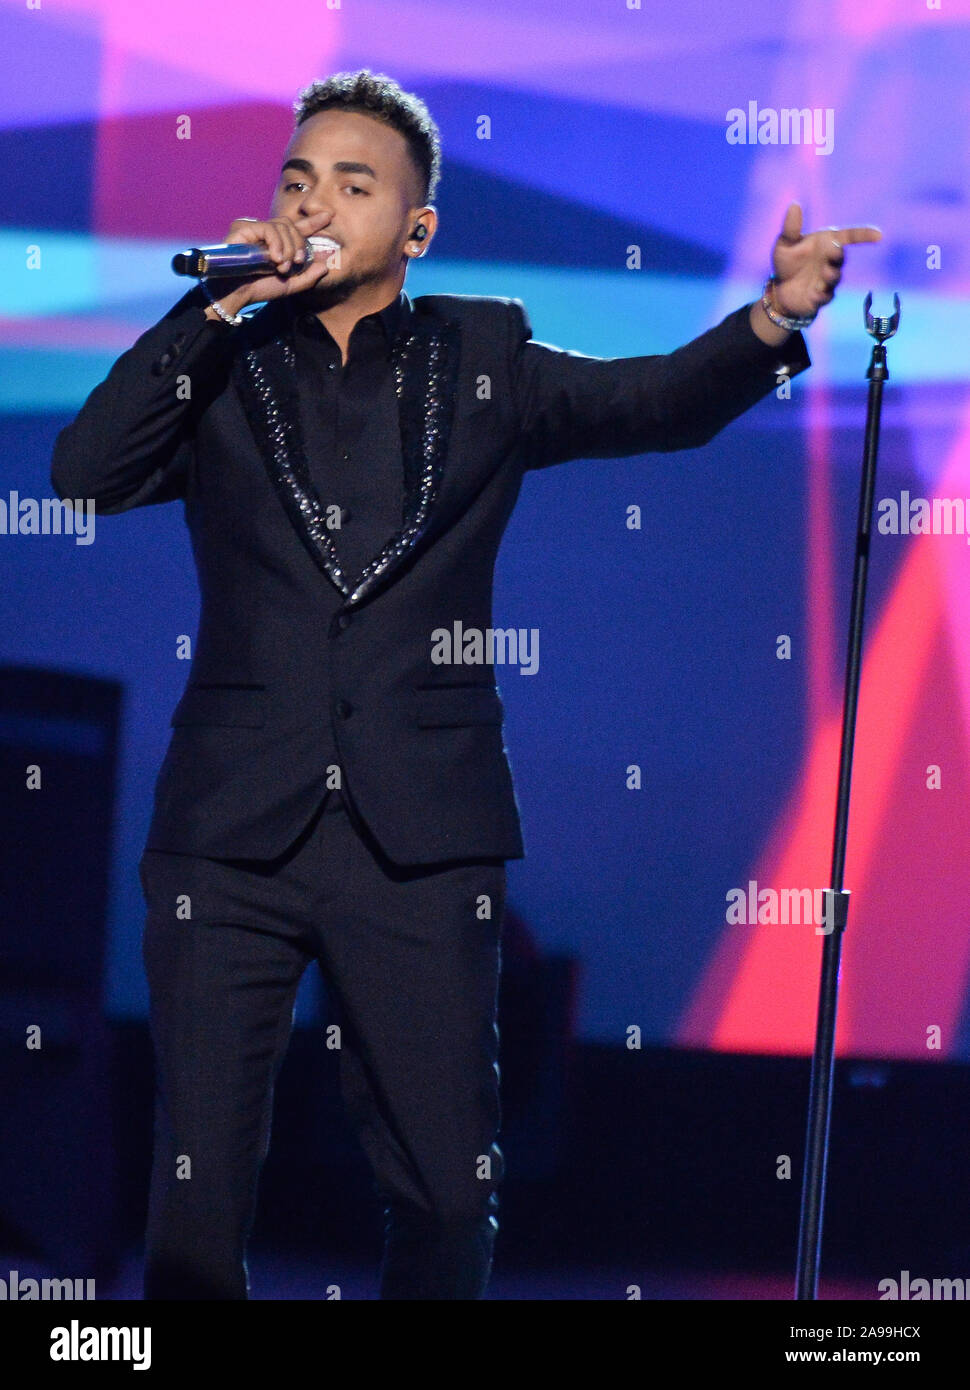 Las Vegas, United States. 13th Nov, 2019. Singer Ozuna performs "La Camisa  Negra" onstage at the Latin Grammy Person of the Year gala honoring  Columbian singer Juanes at the MGM Grand Convention